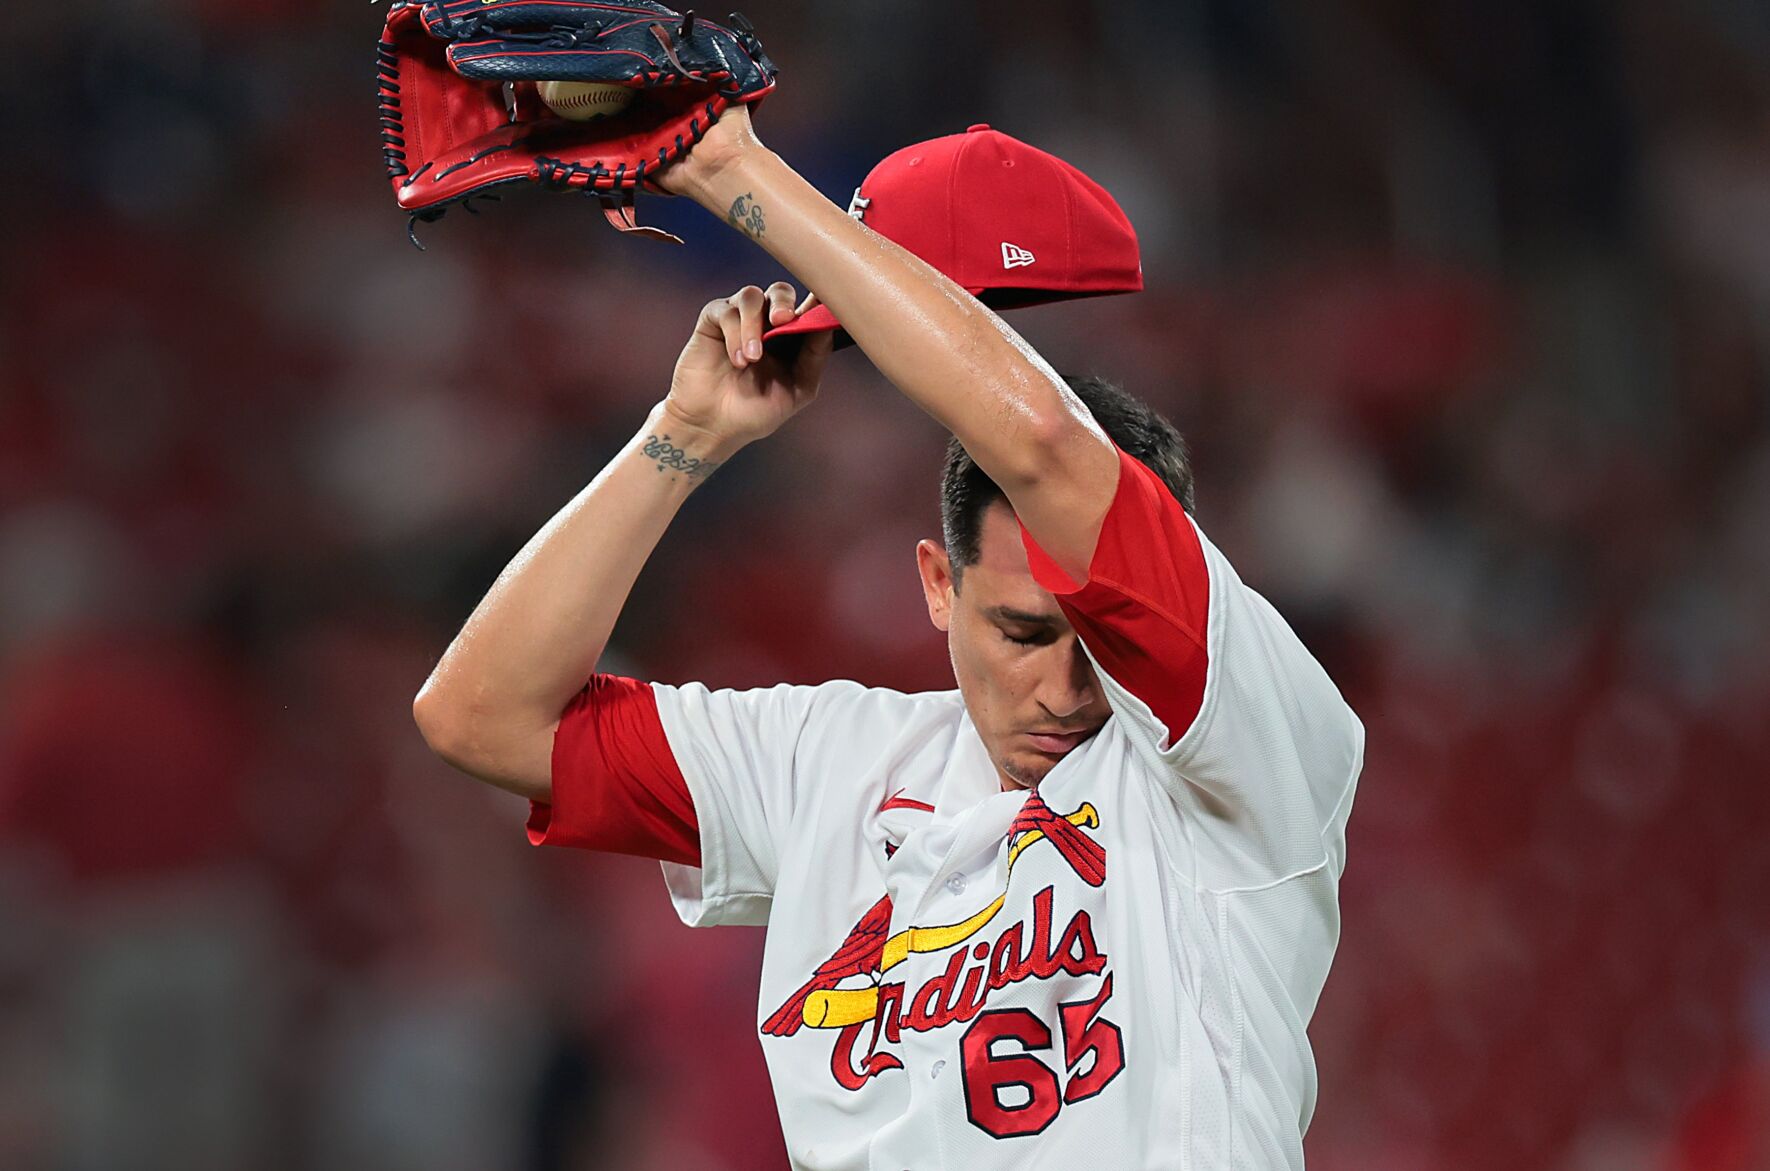 Giovanny Gallegos had helped steady Cardinals bullpen, but he looked helpless against Astros